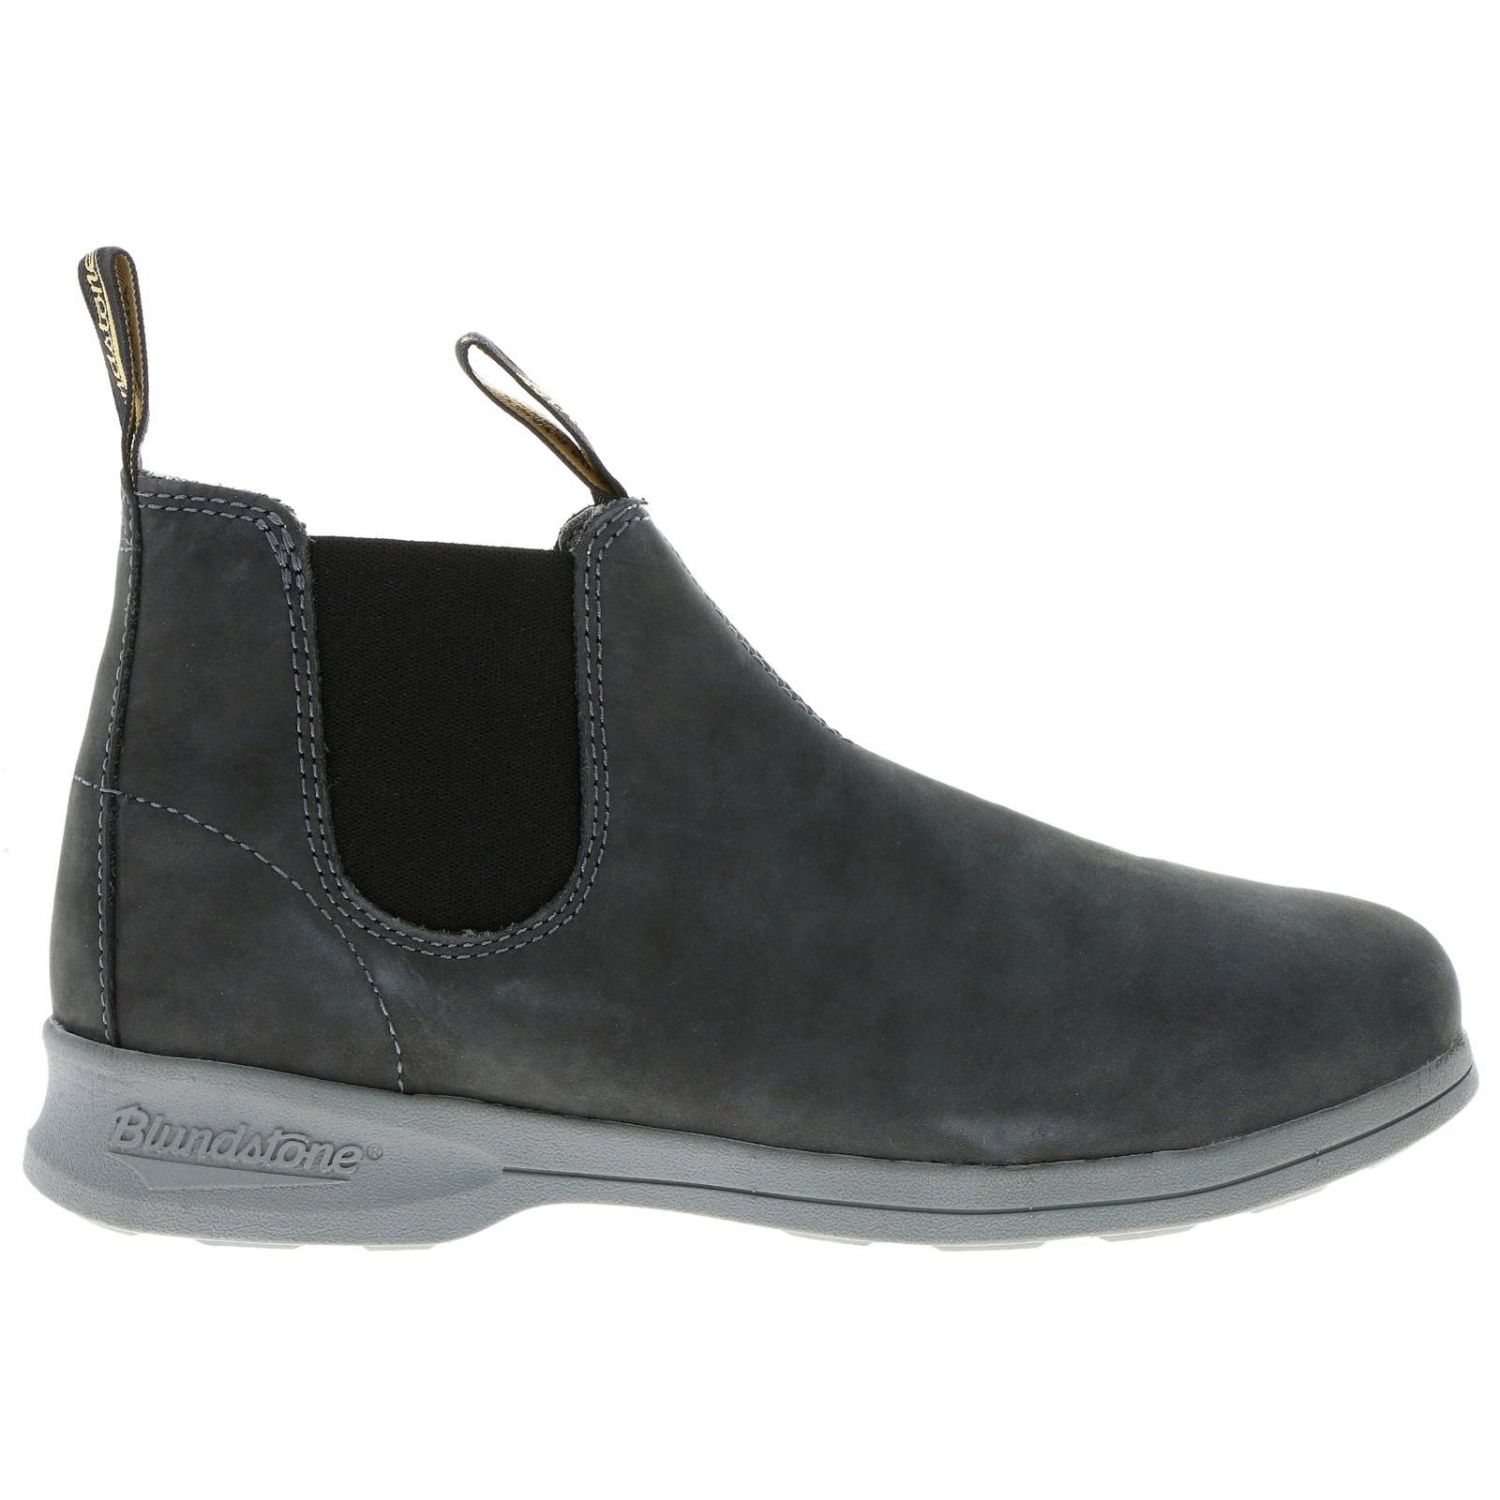 Blundstone Outlet: boots for men - Grey | Blundstone boots BCCAL0398 ...